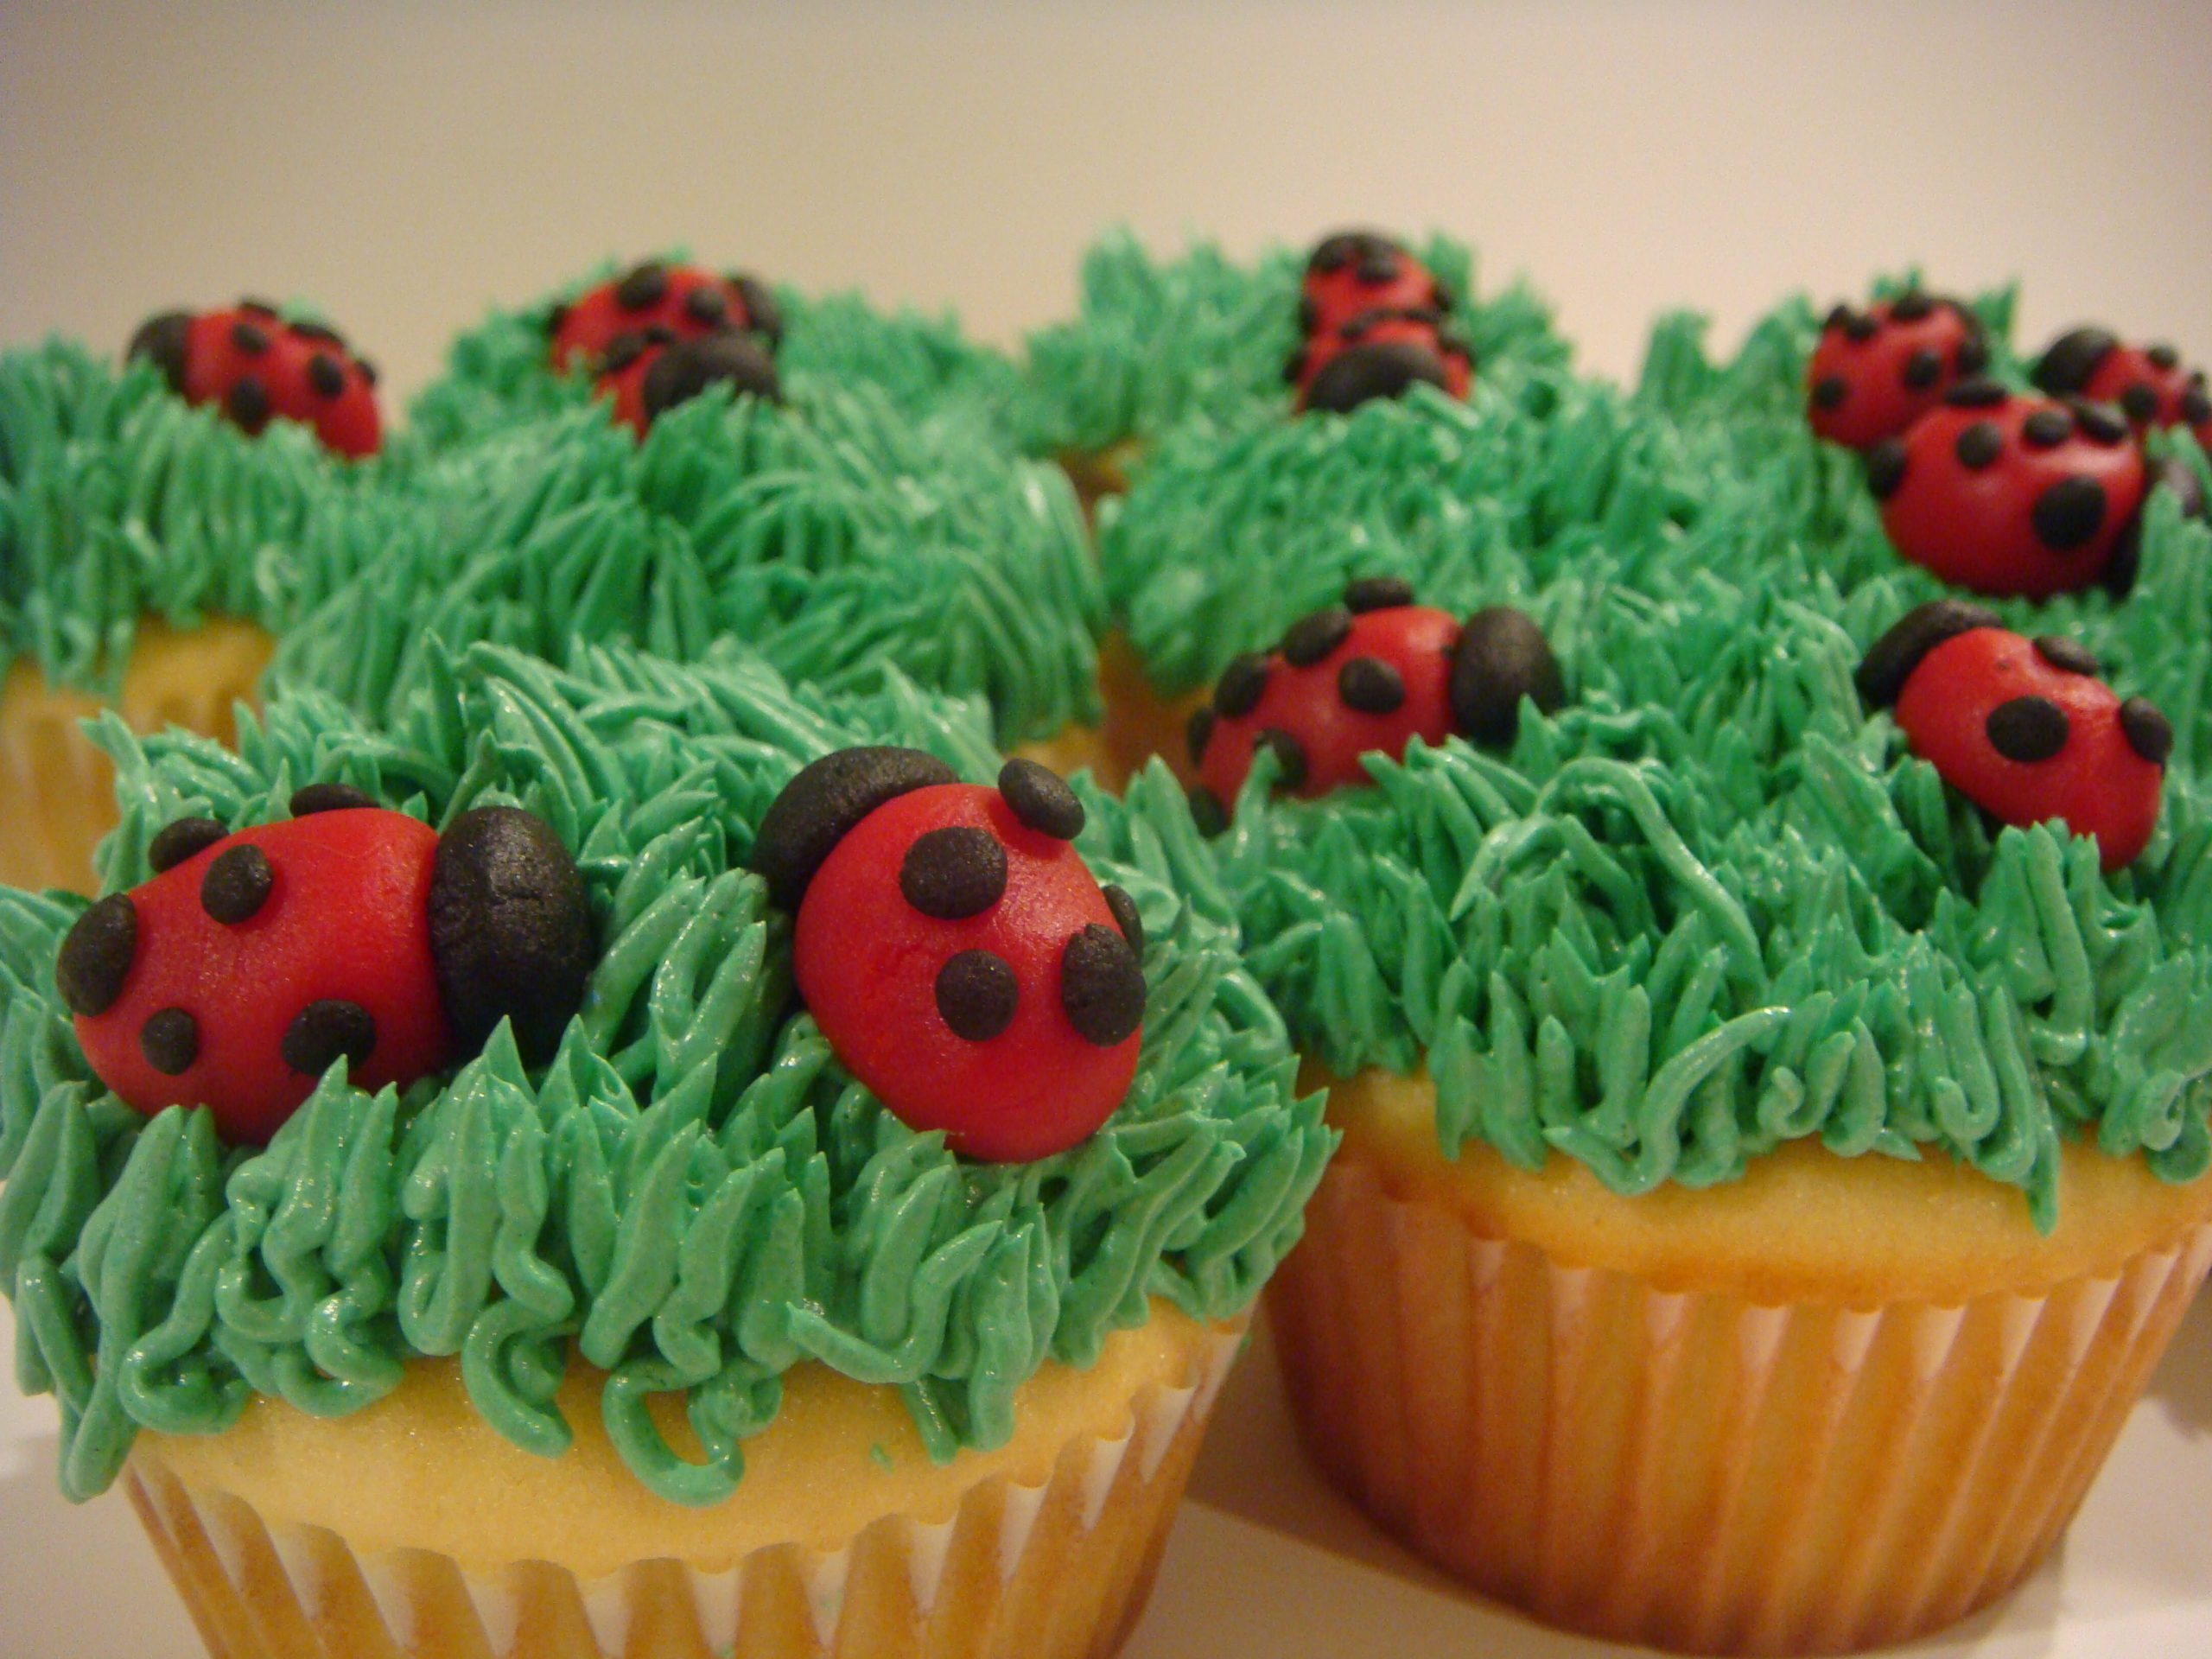 Cupcakes with green icing to appear as grass and marzipan shaped as ladybugs